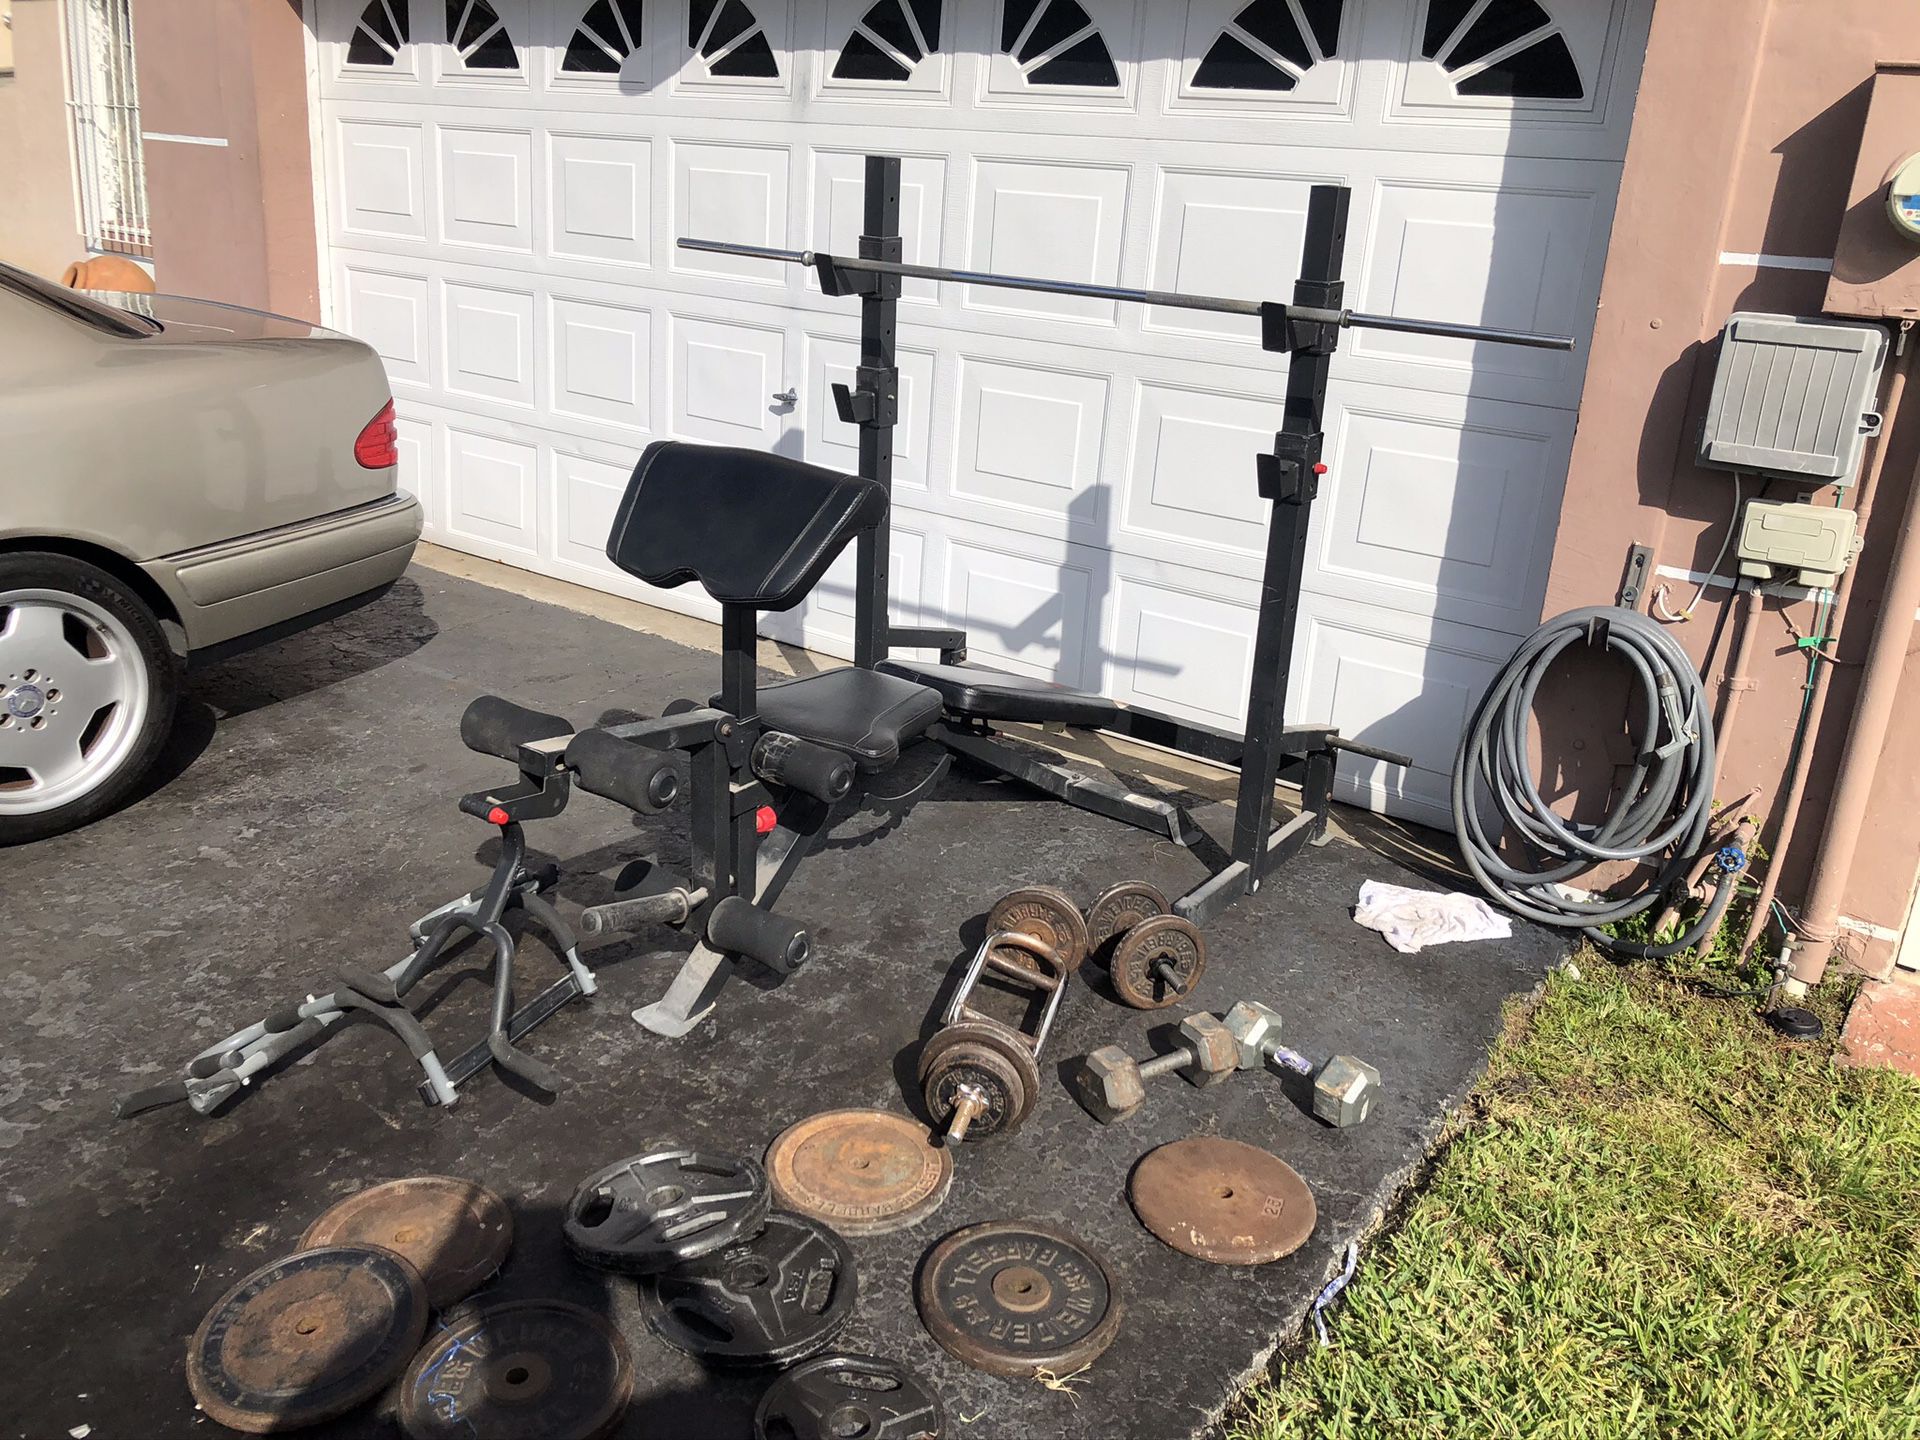 weight set good condition over 200 lbs of weight +++ west kendall ****